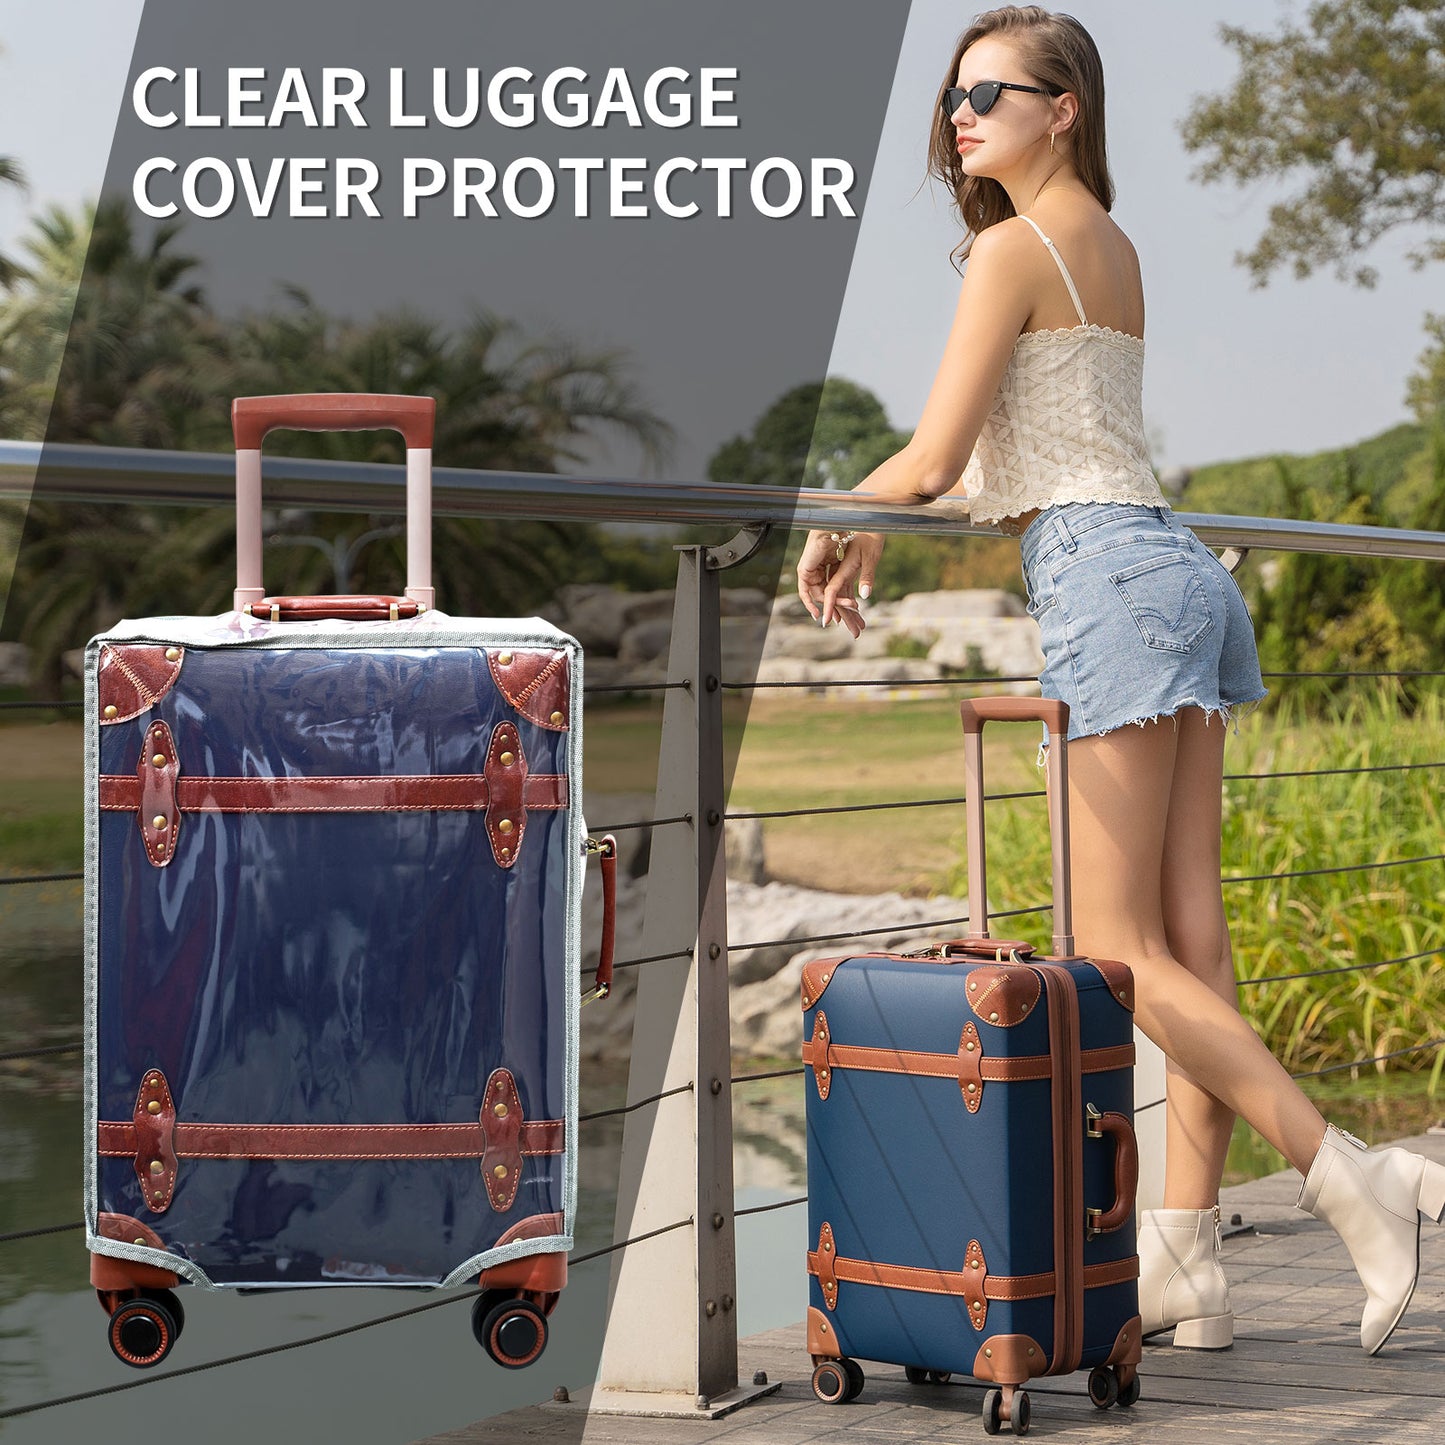 NZBZ Vintage Luggage Sets 3 Pieces Luxury Cute Suitcase Retro Trunk Luggage with TSA Lock for Men and Women (Navy Blue, 14" & 20" & 28")